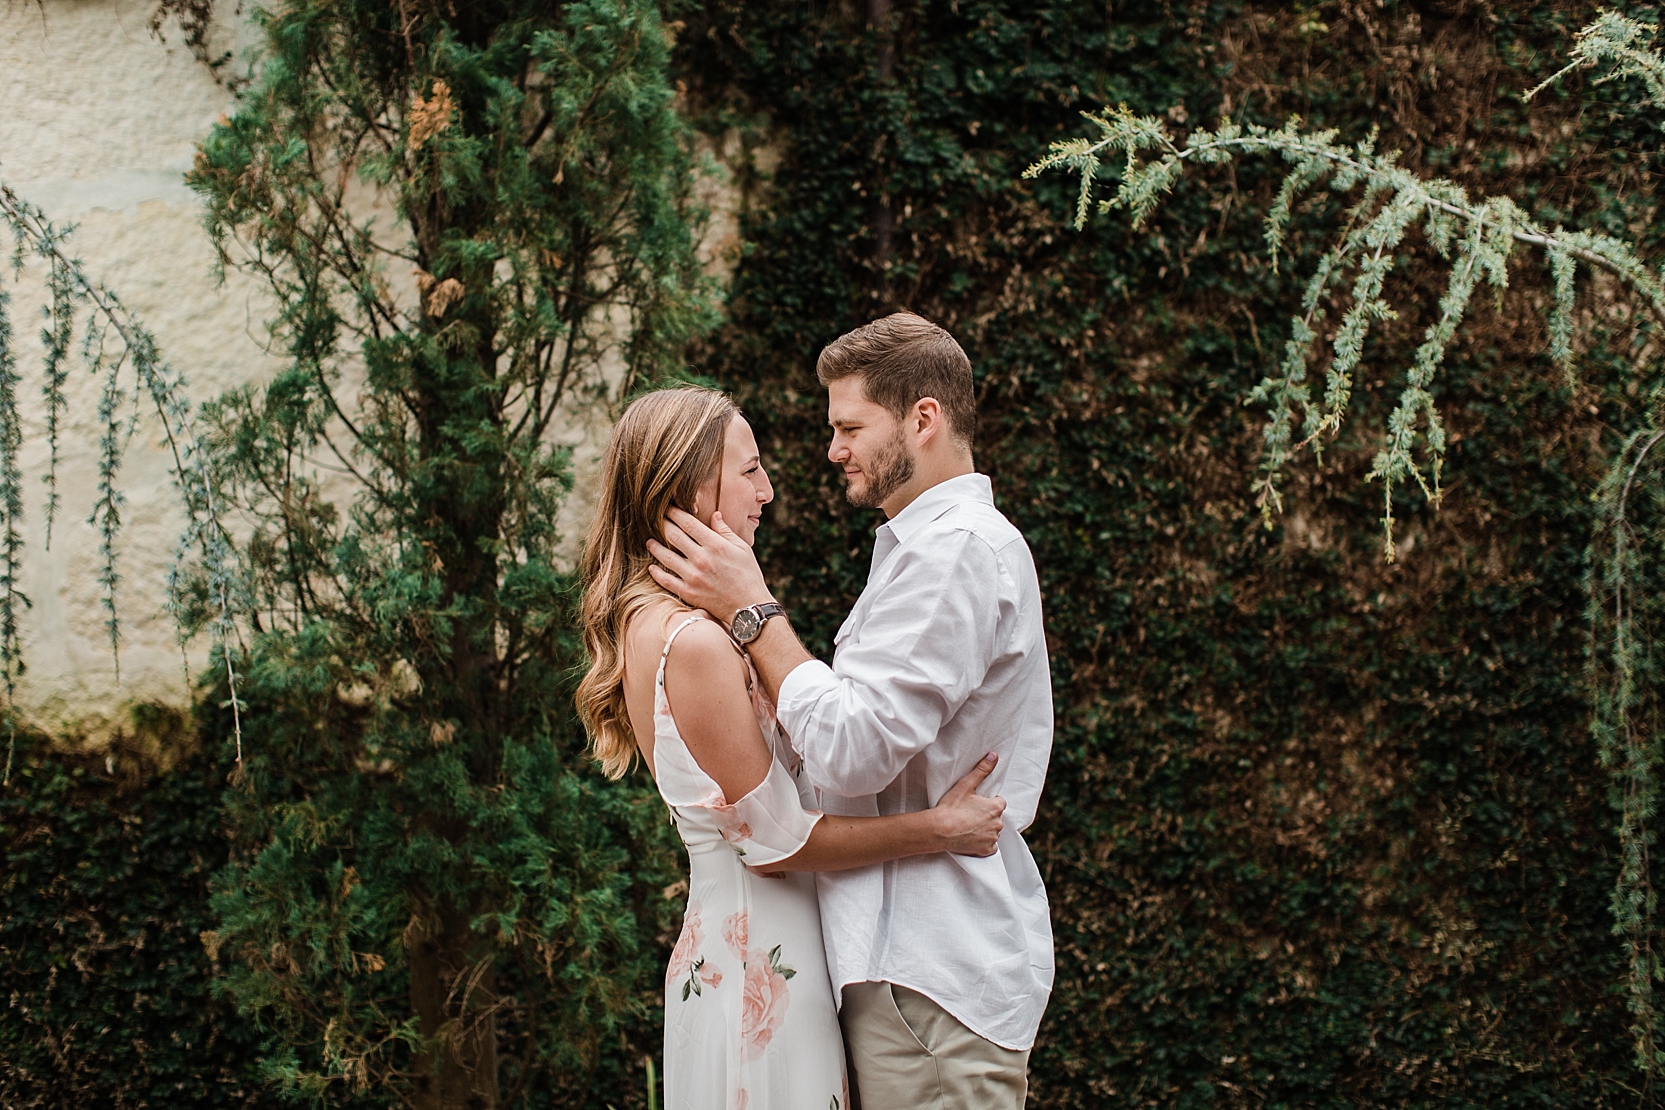 Spring Engagement Session at the Dallas Arboretum_Lindsey Ramdin_L.A.R. Weddings